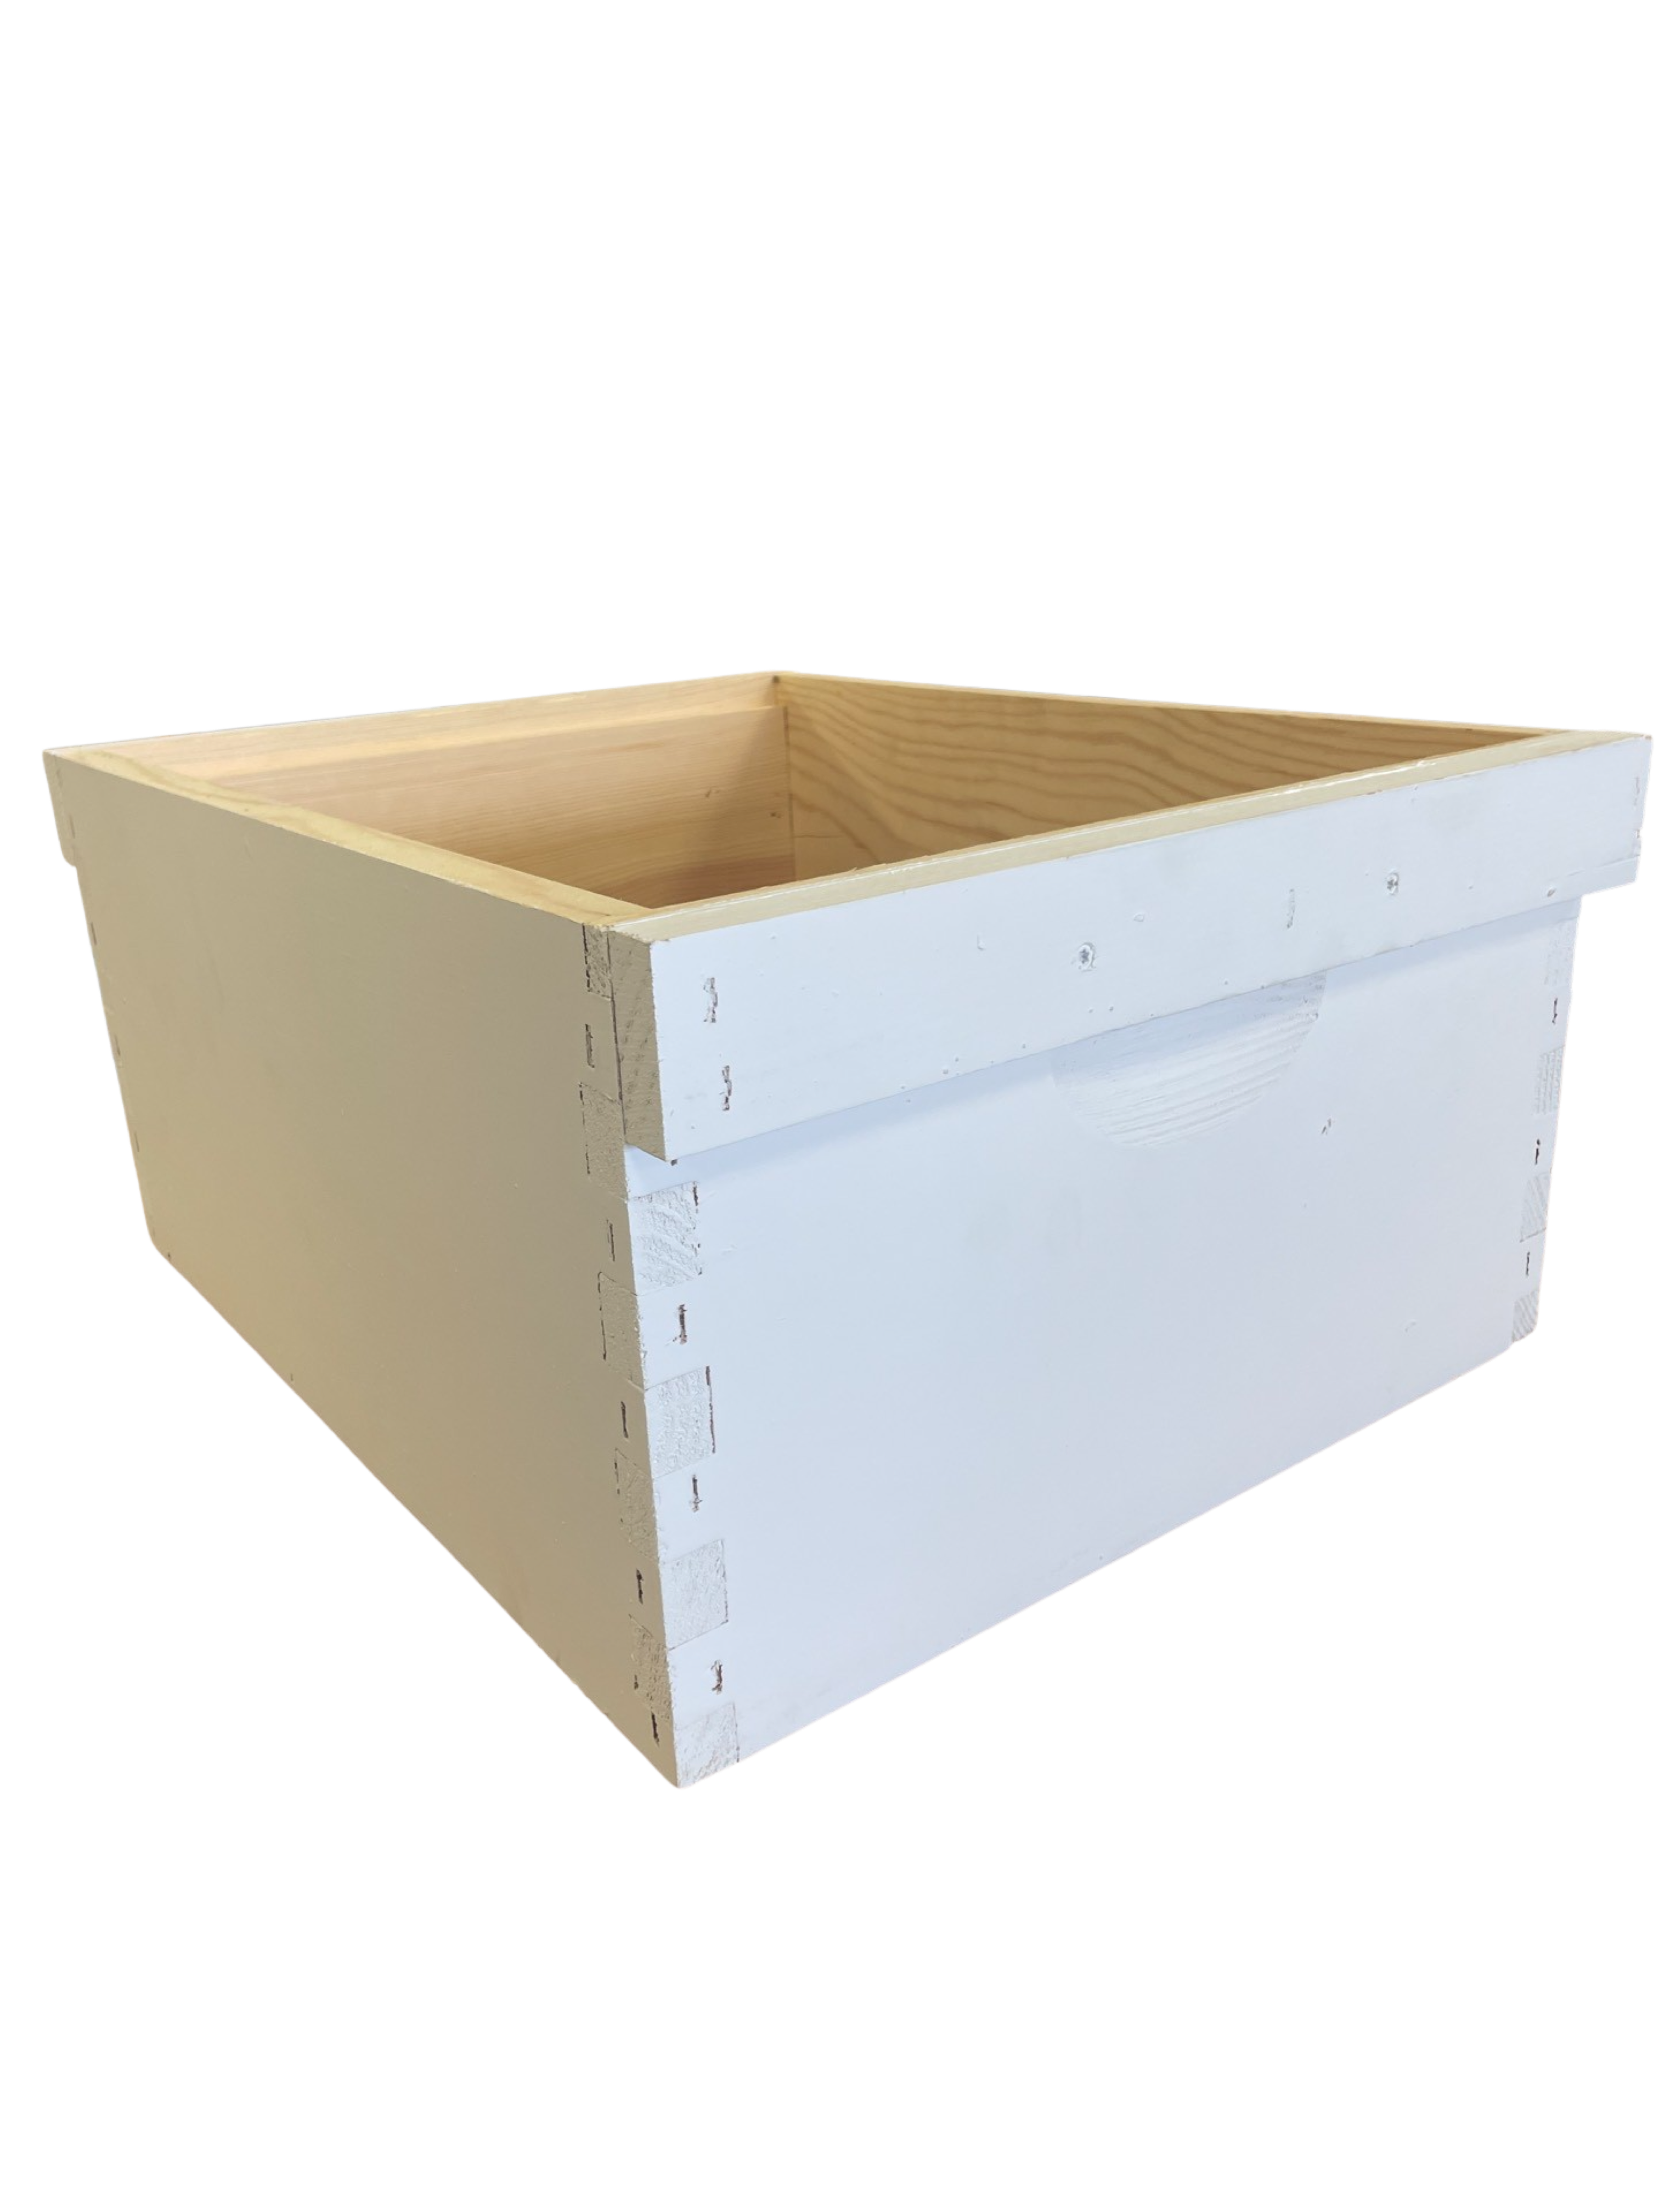 Deep (9 5/8") Hive Box | Cleated | Treated | Painted